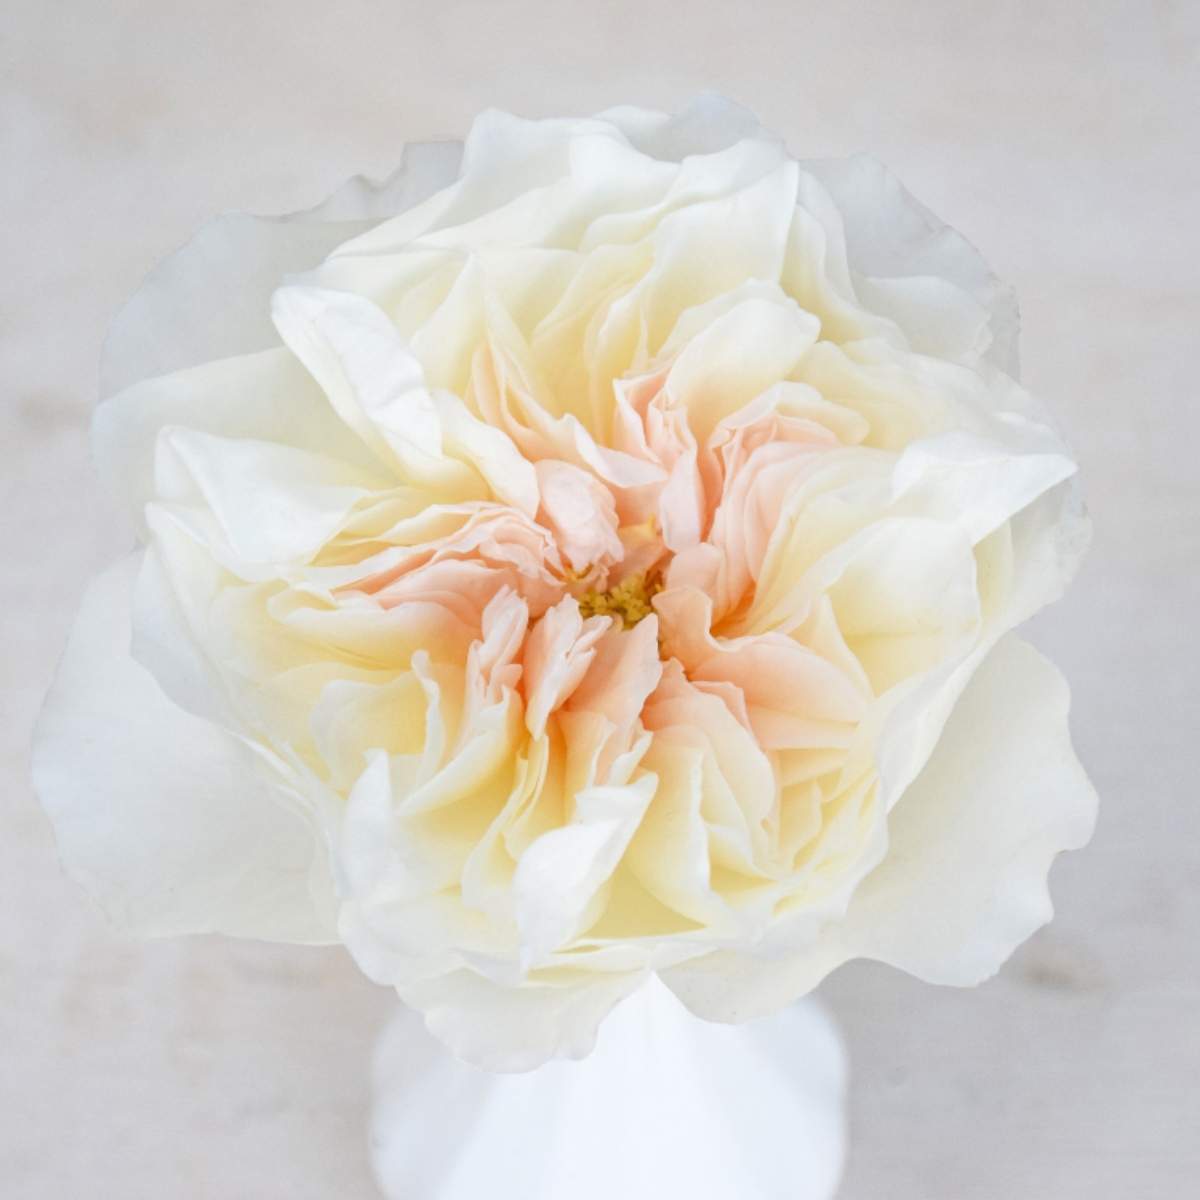 Eugenie - Cut Flowers - Roses on Thursd Featured